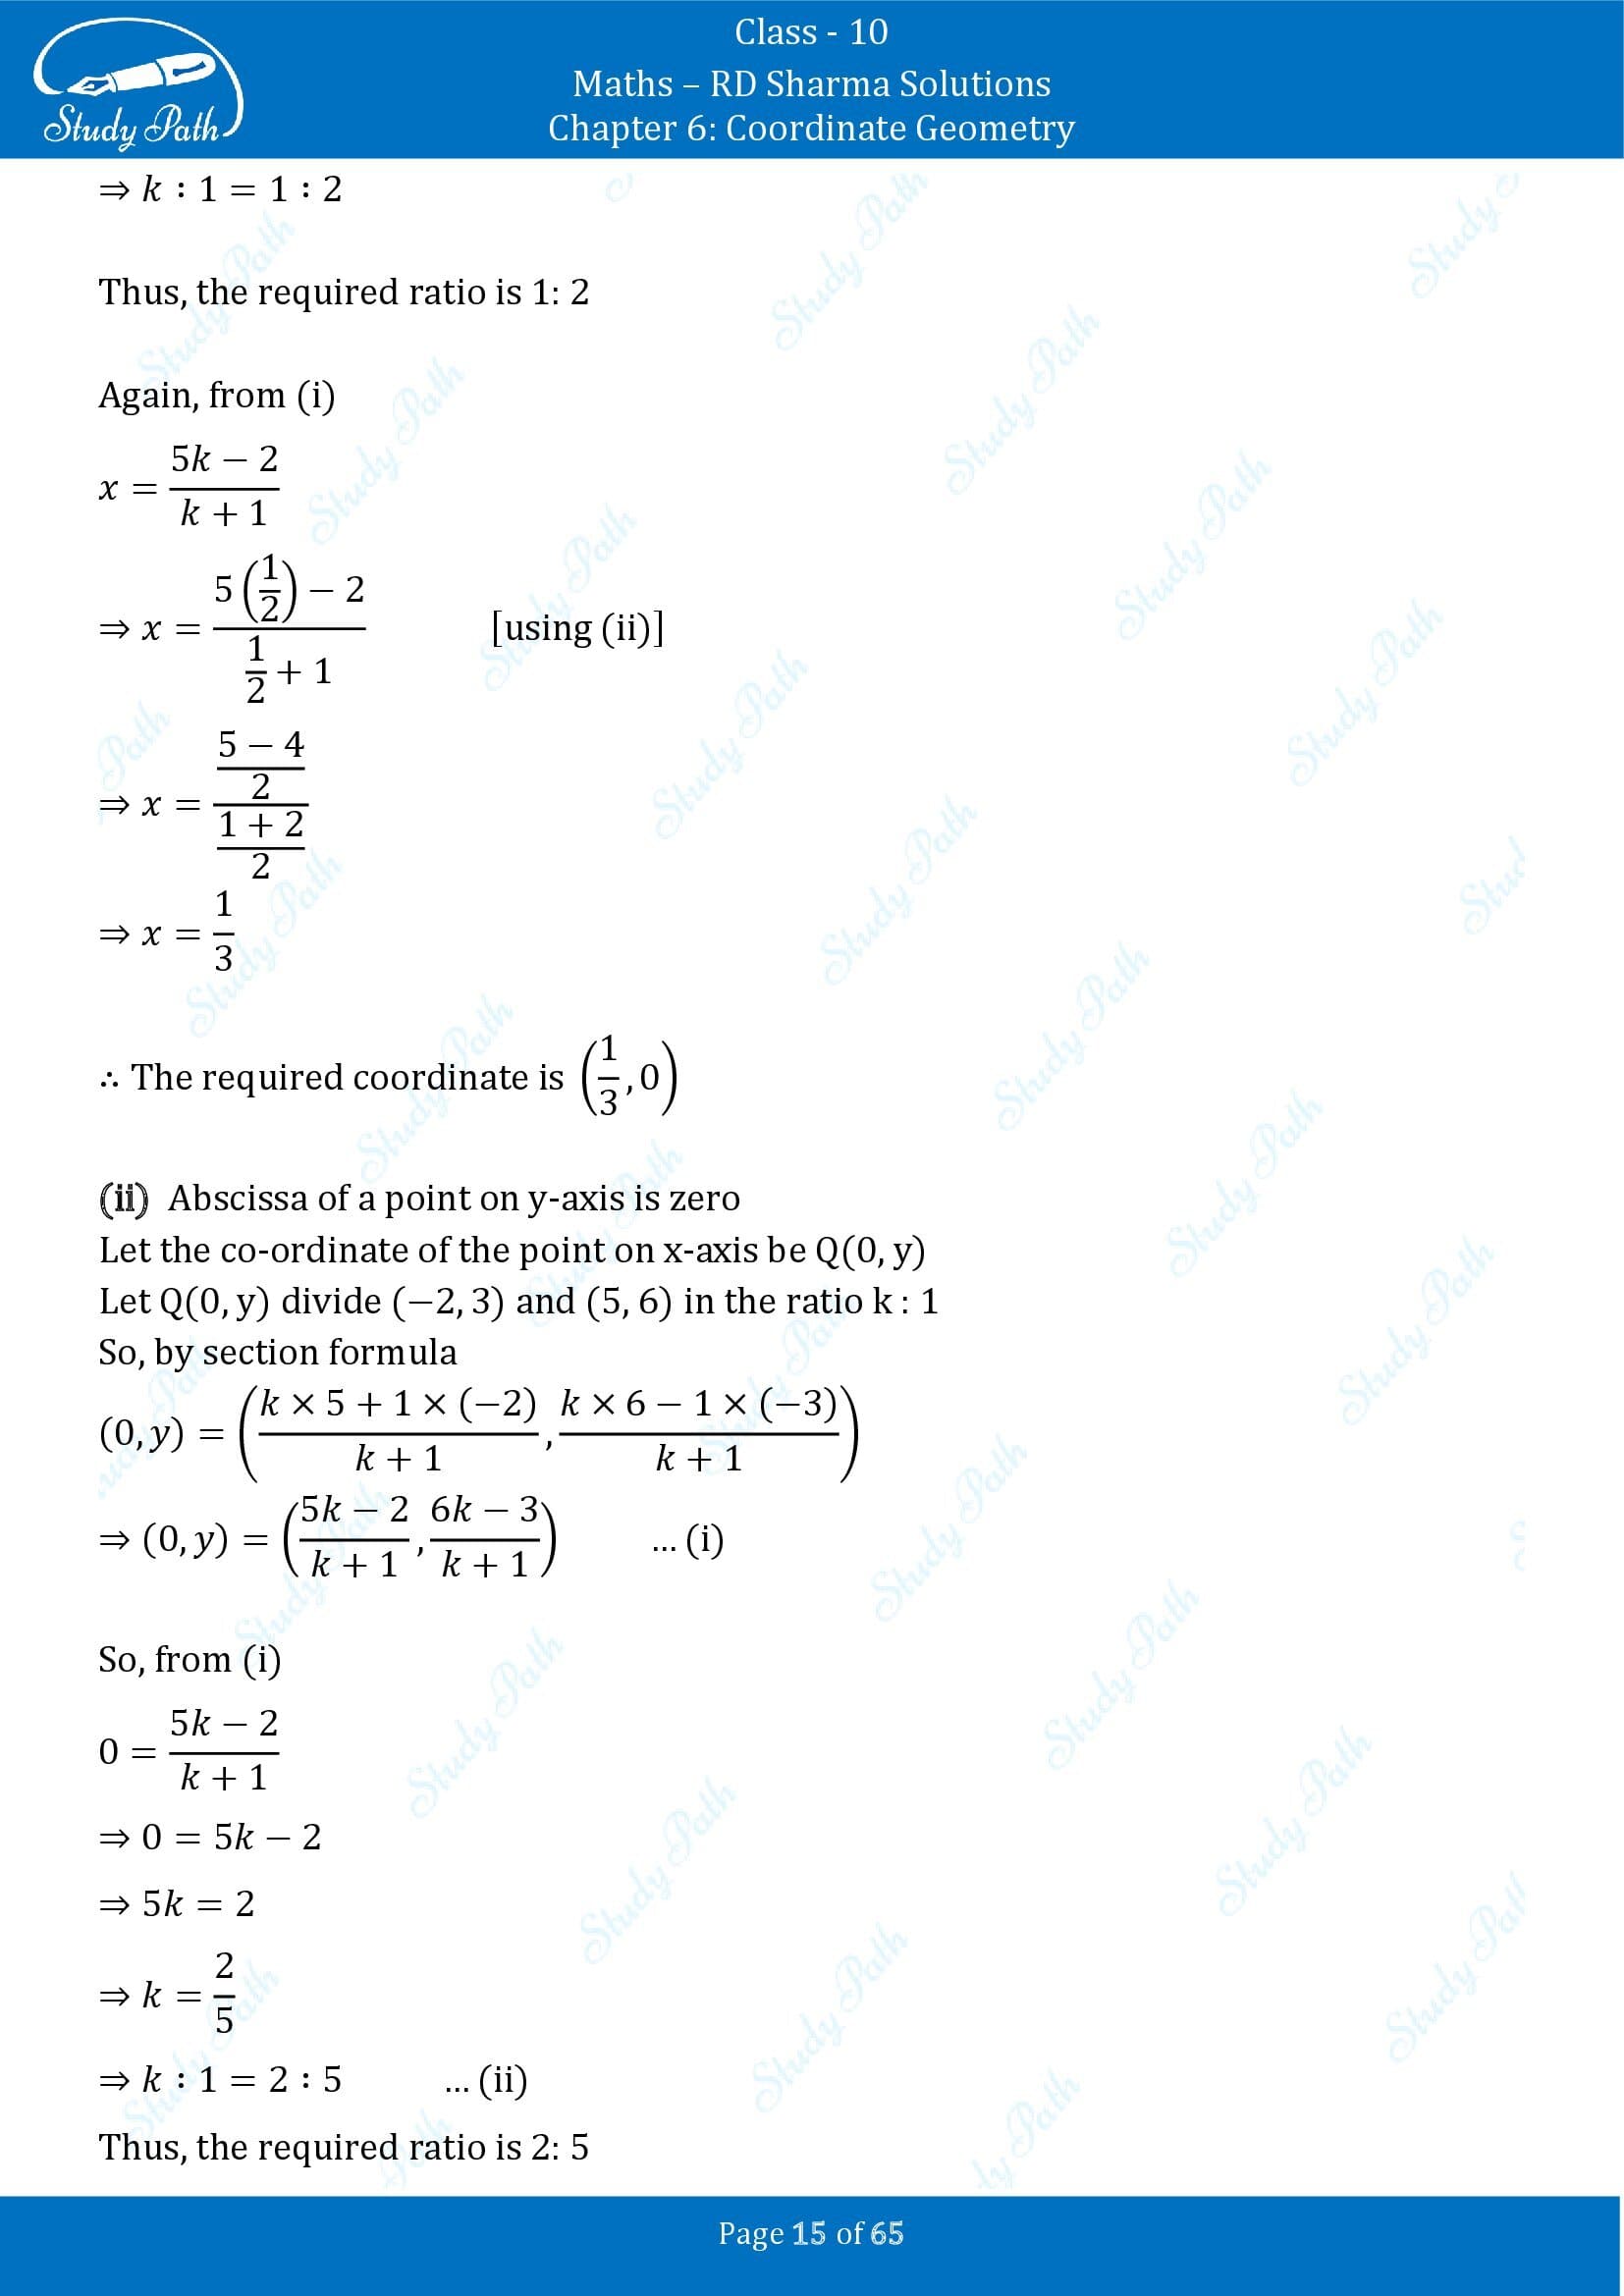 RD Sharma Solutions Class 10 Chapter 6 Coordinate Geometry Exercise 6.3 00015